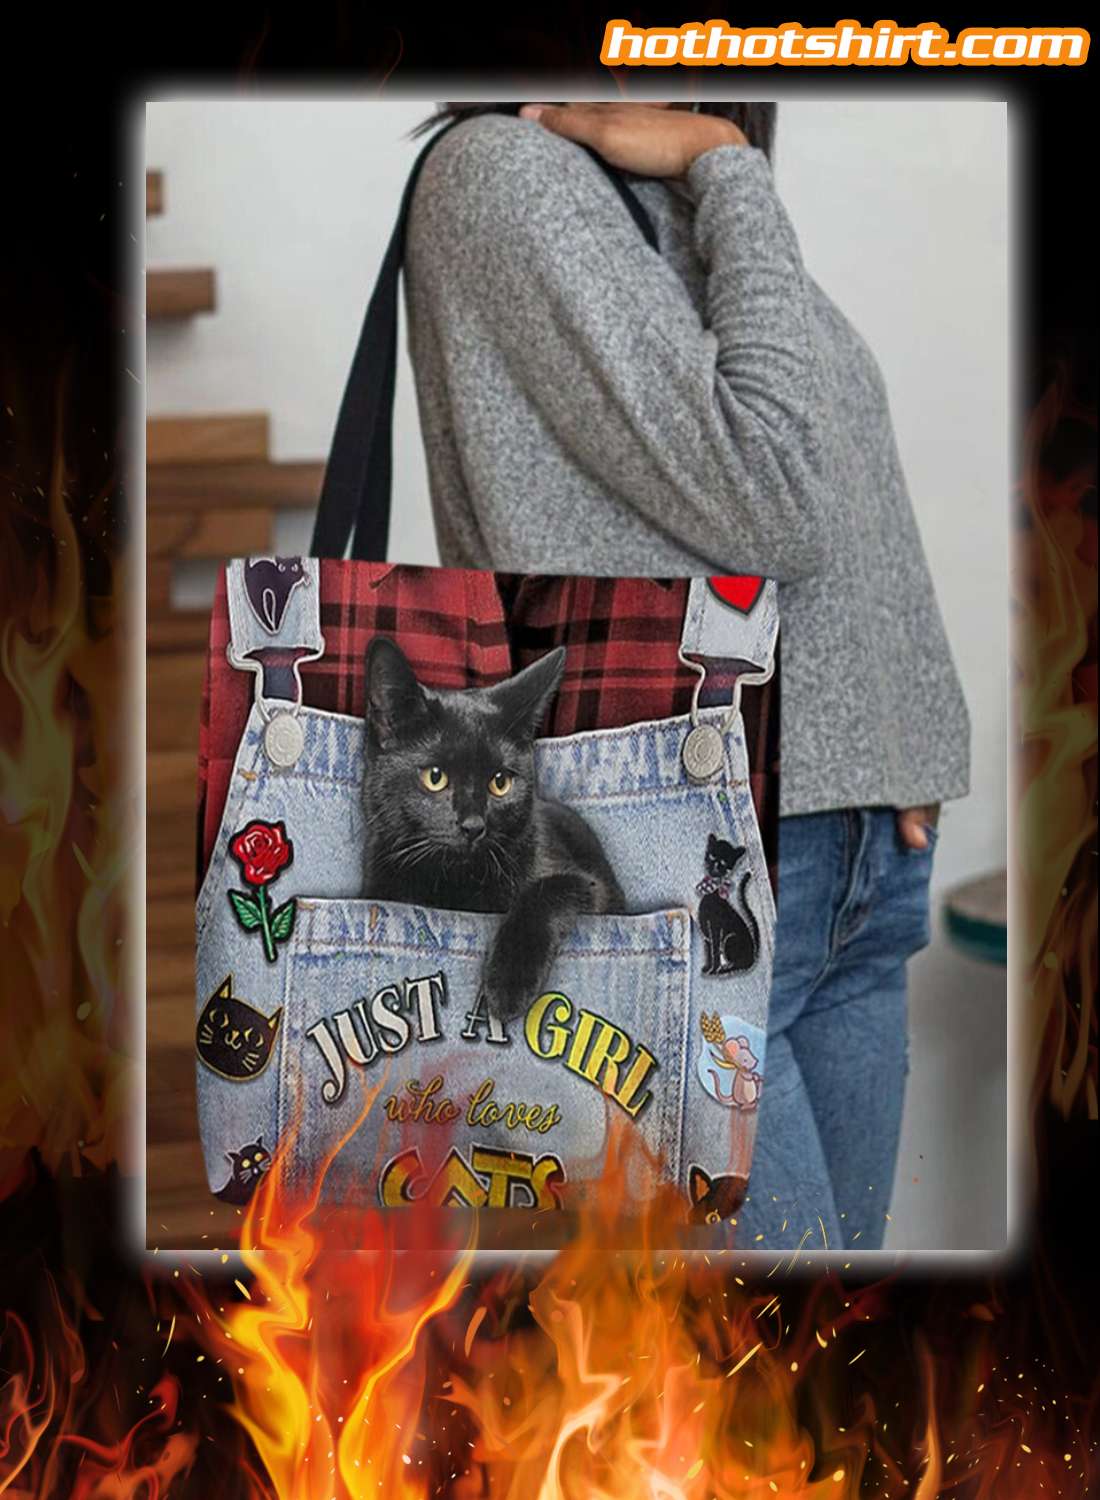 Just a girl who loves cats tote bag 1